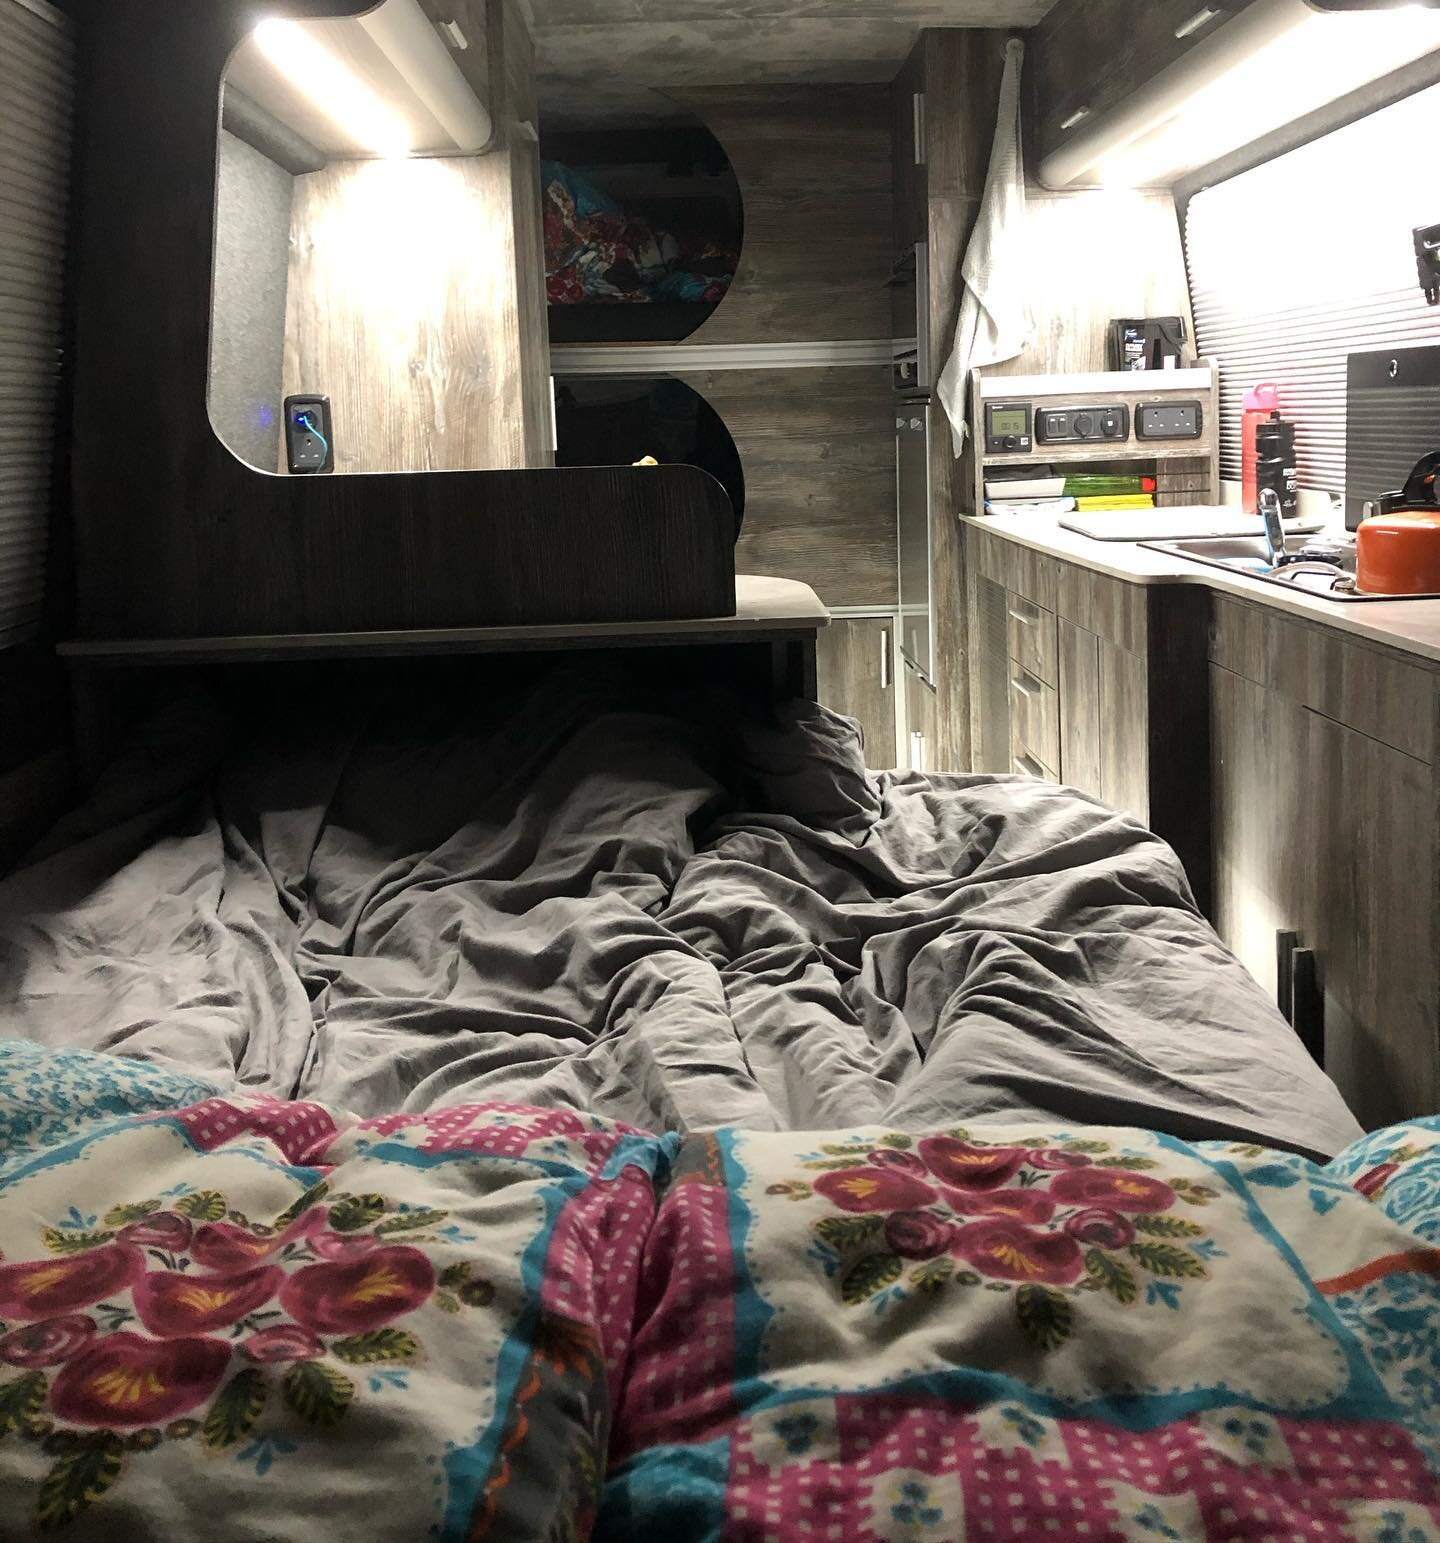 Here&rsquo;s what a cosy night in in our LWB crafter might look like! 🚐🤜🏼 this lovely van still has some availability for the summer months so head over to Jimbobsbuses.com to book!